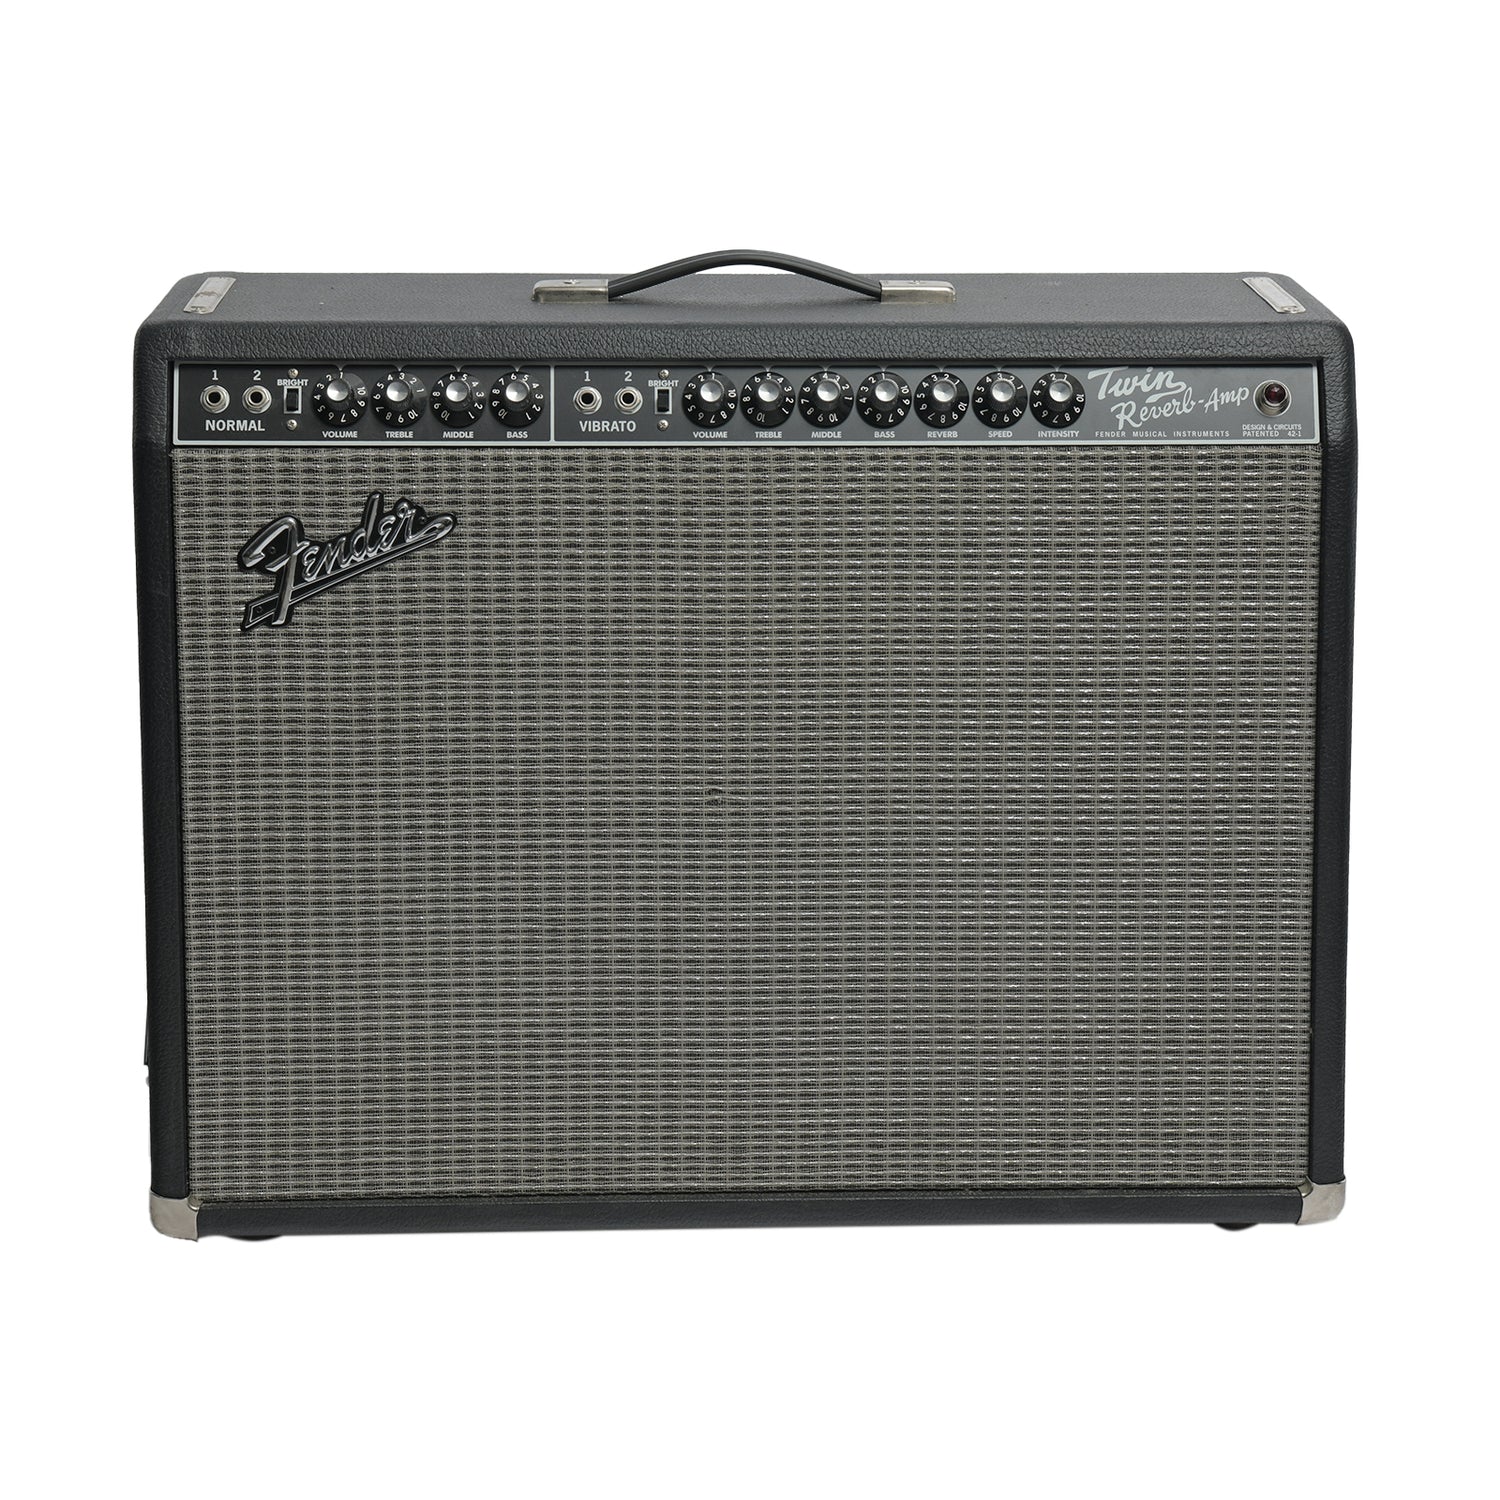 Front of Fender '65 Twin Reverb Reissue